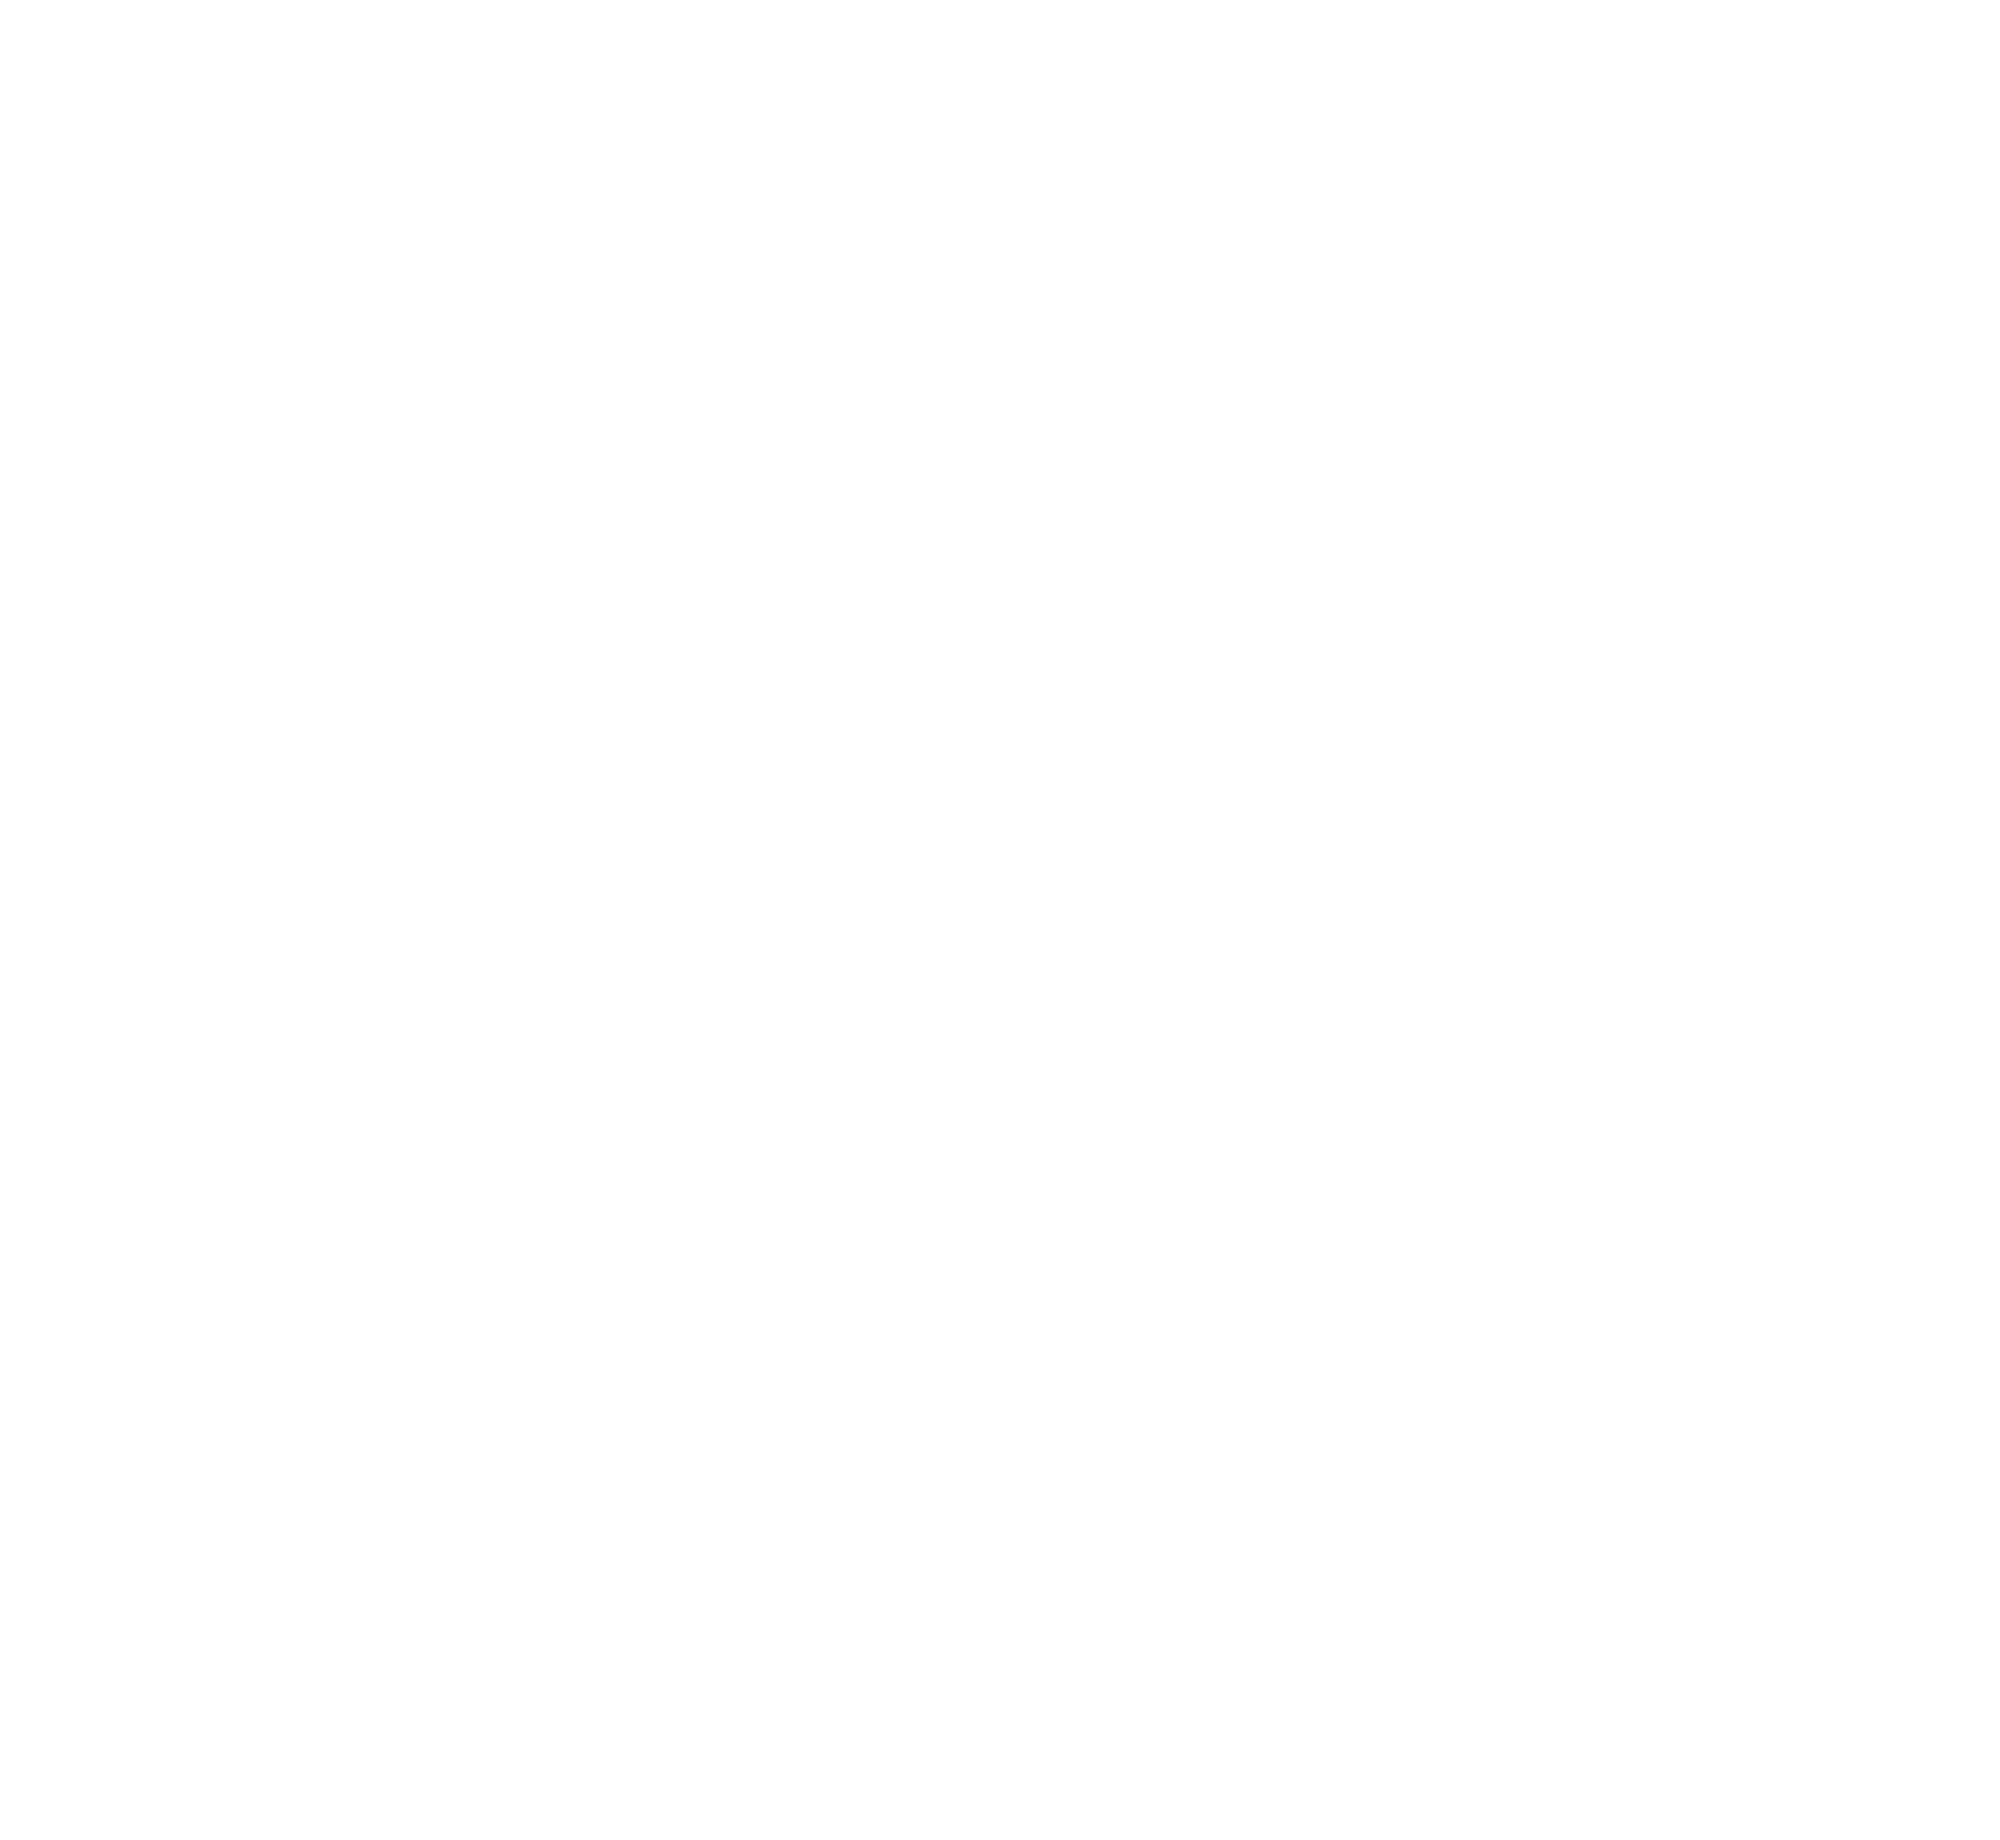 The logo of the 2022 Venice Biennale